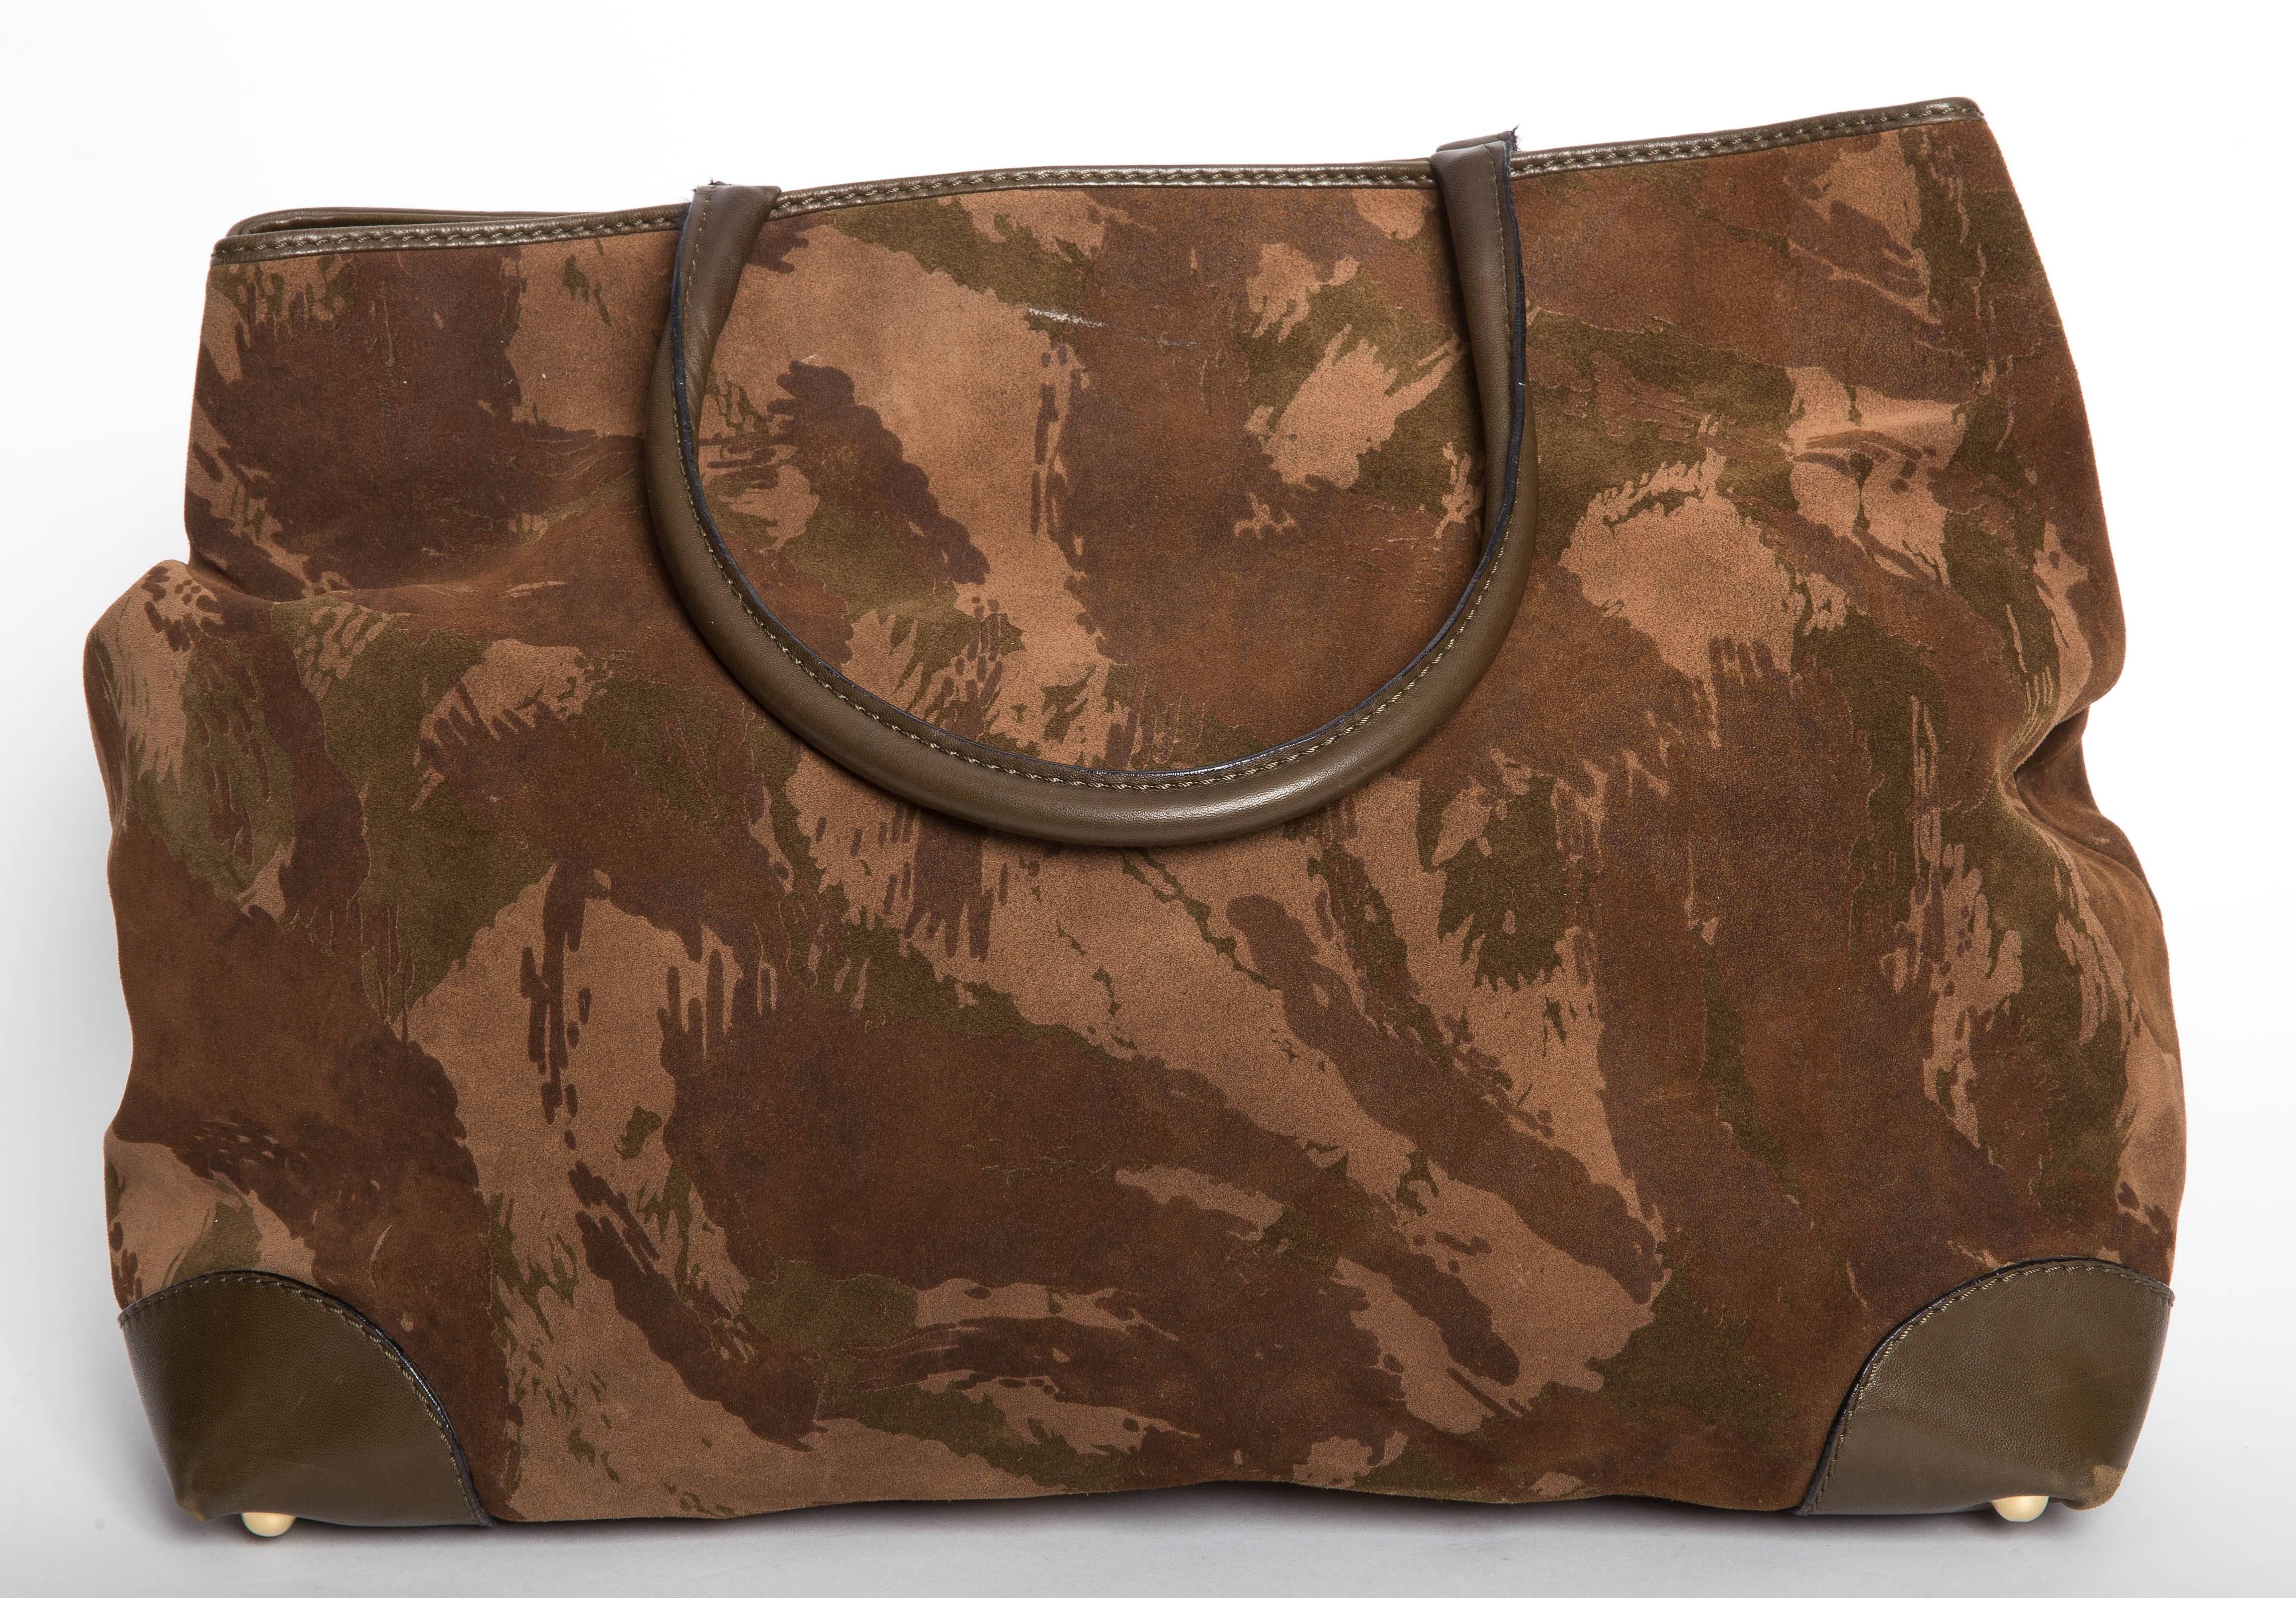 Bottega Veneta Camouflage Suede Tote with Double Leather Handles and Leather Trim and Leather Corners with four brass feet. The interior of the bag is lined in polished cotton and features a large zipper pocket. There is some soiling to the lining